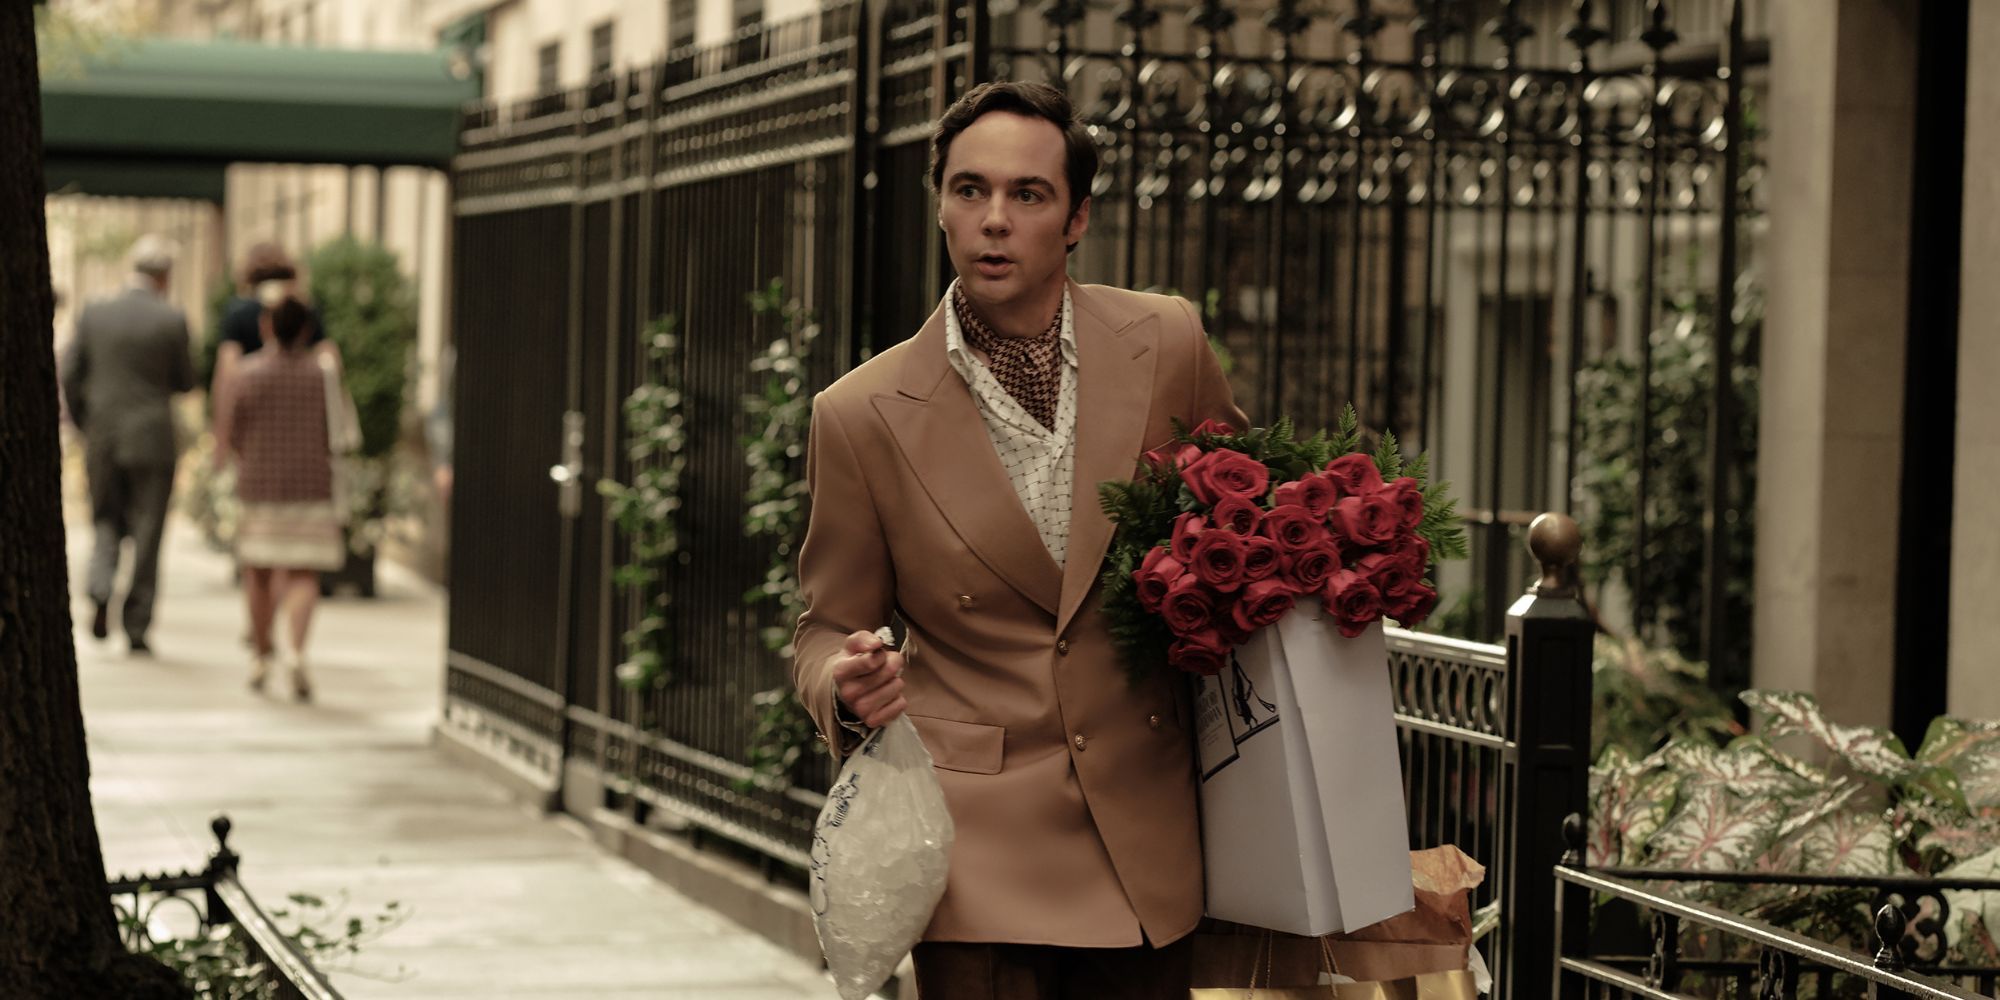 A man in a suit walking down the street with a bouquet of roses and a bag of ice